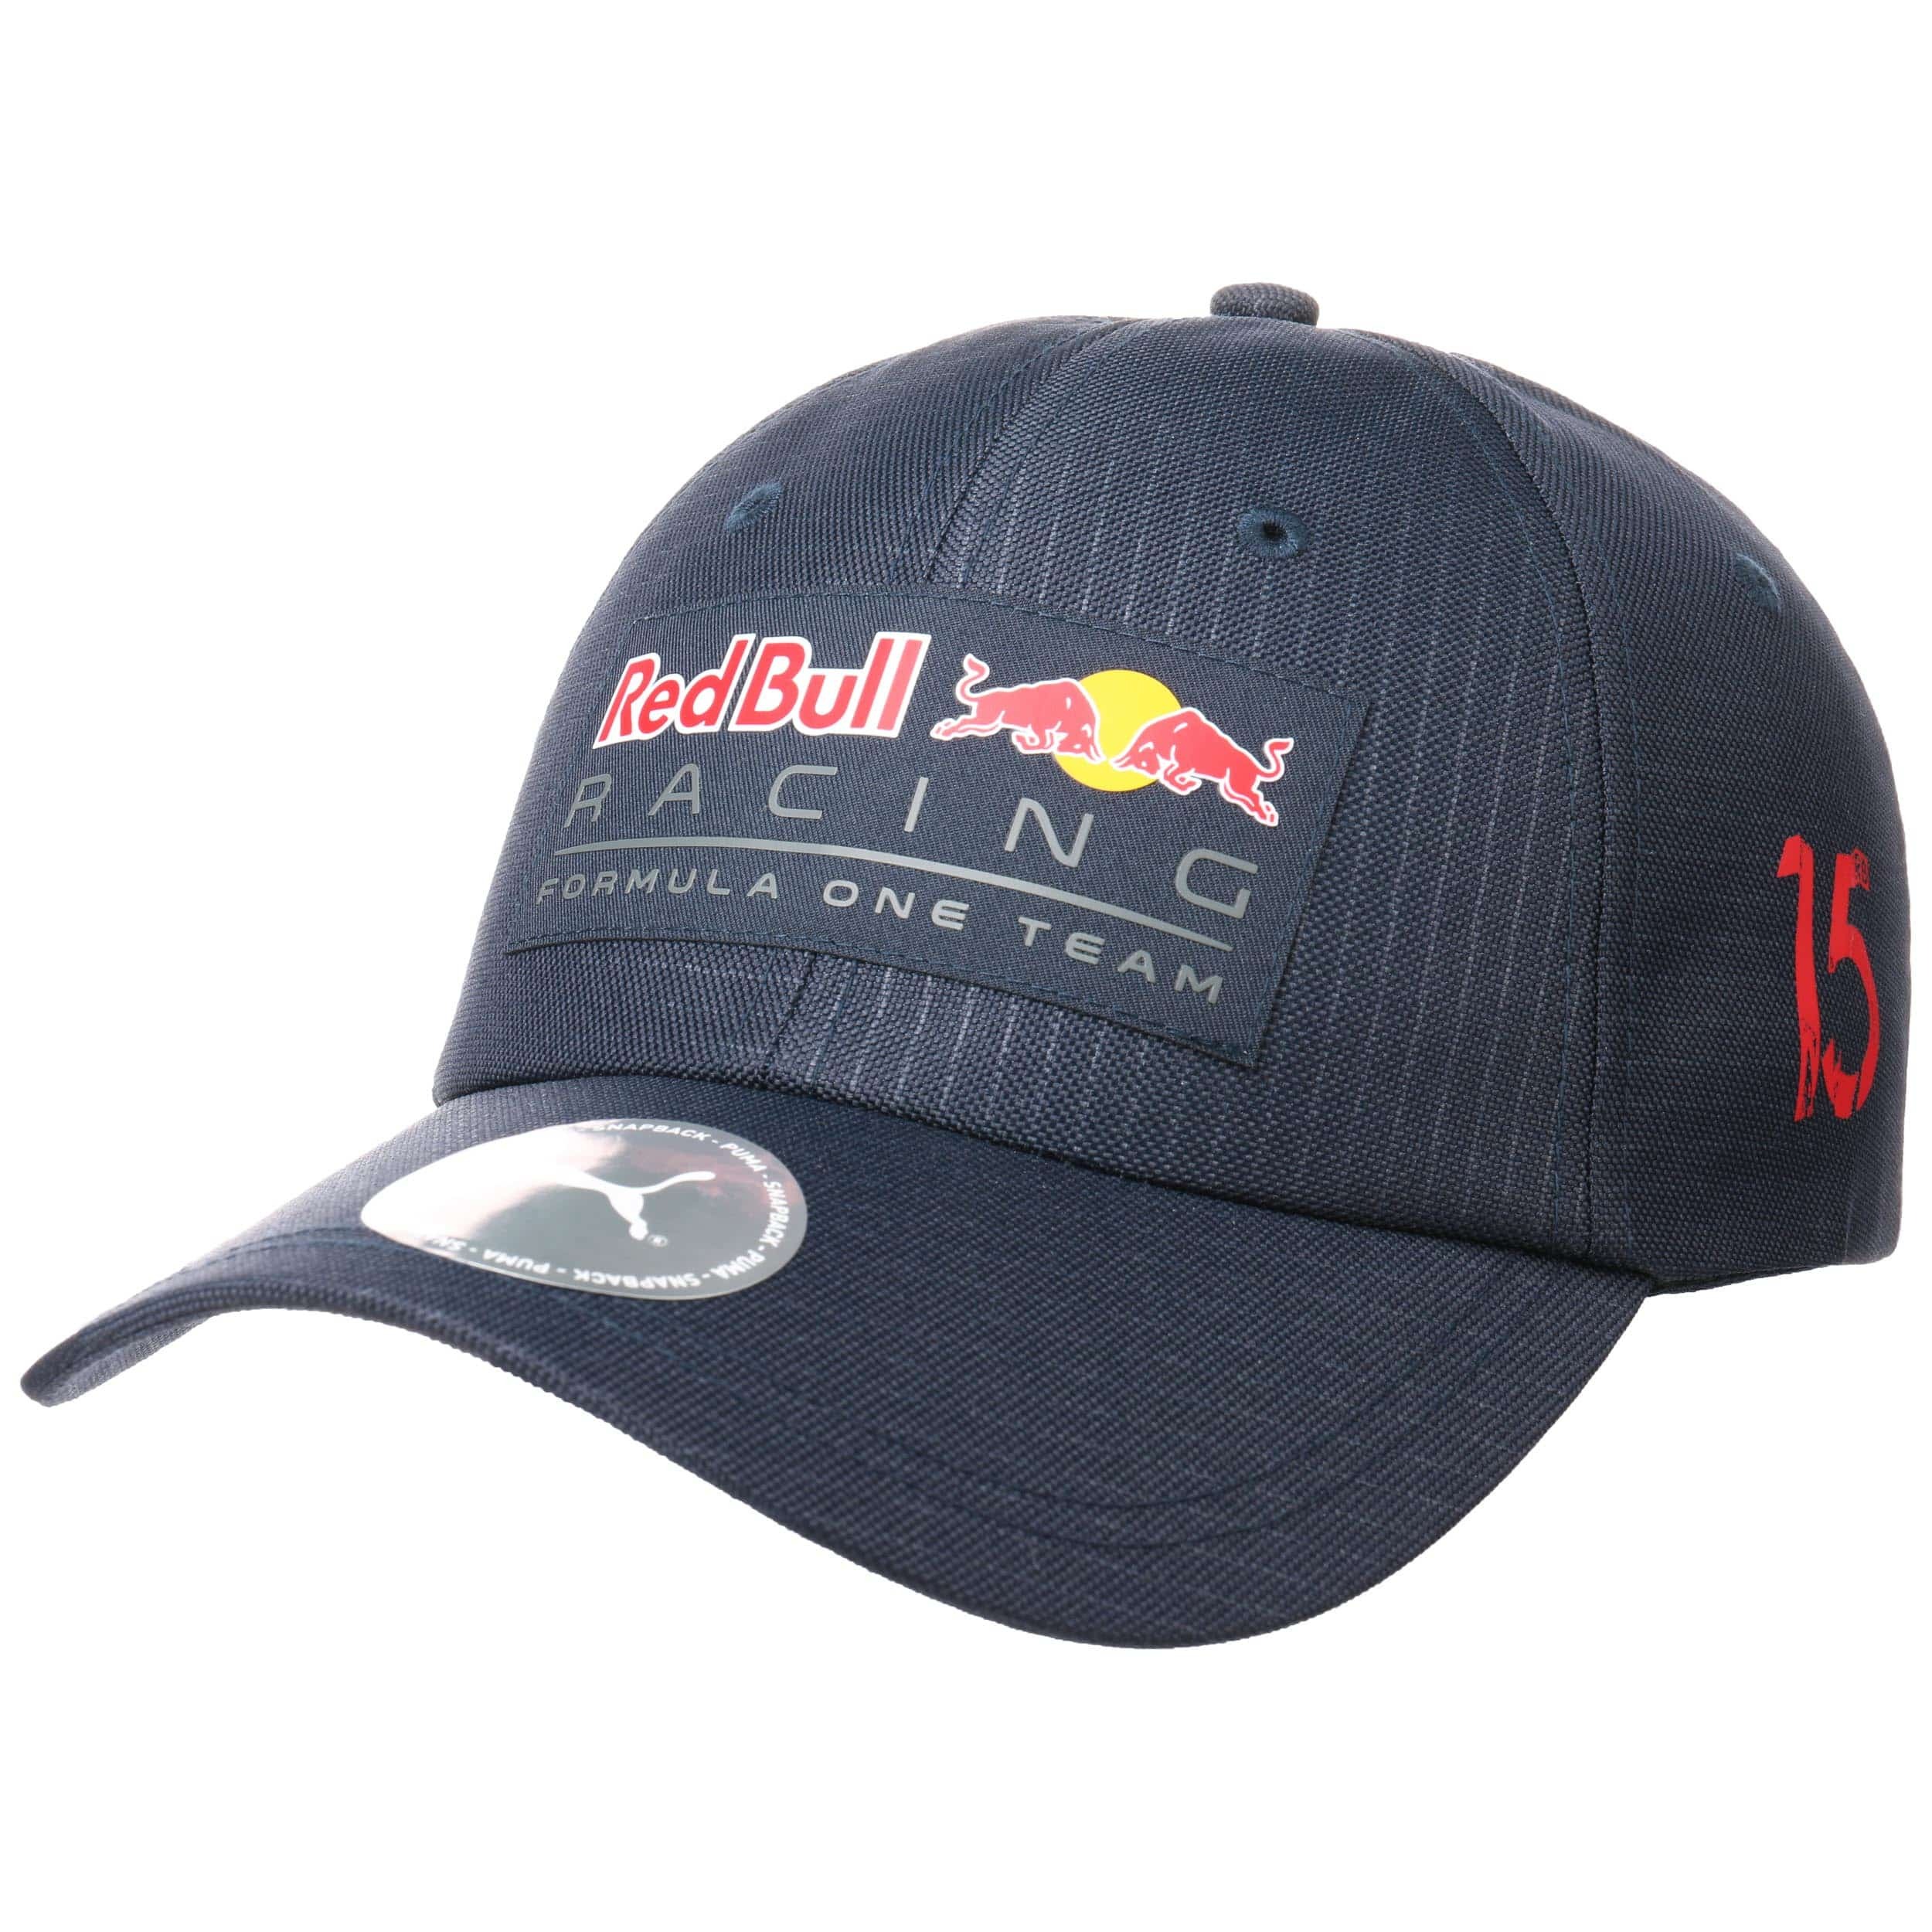 Red Bull Racing Lifestyle Curved Cap by PUMA - 37,95